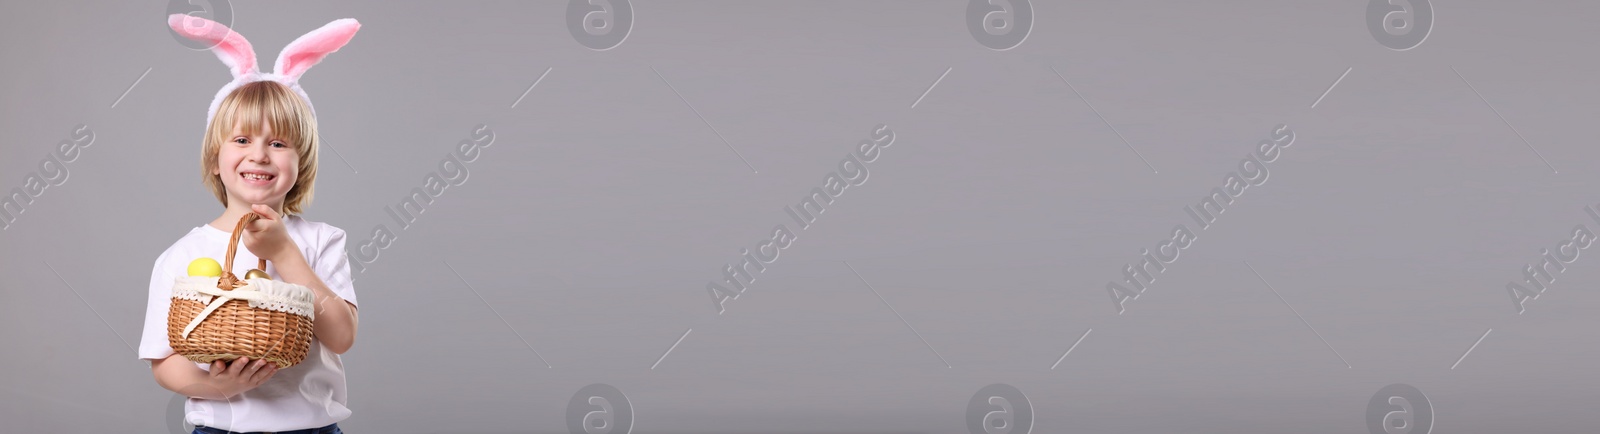 Image of Happy boy with bunny ears holding basket full of Easter eggs on light grey background, space for text. Banner design